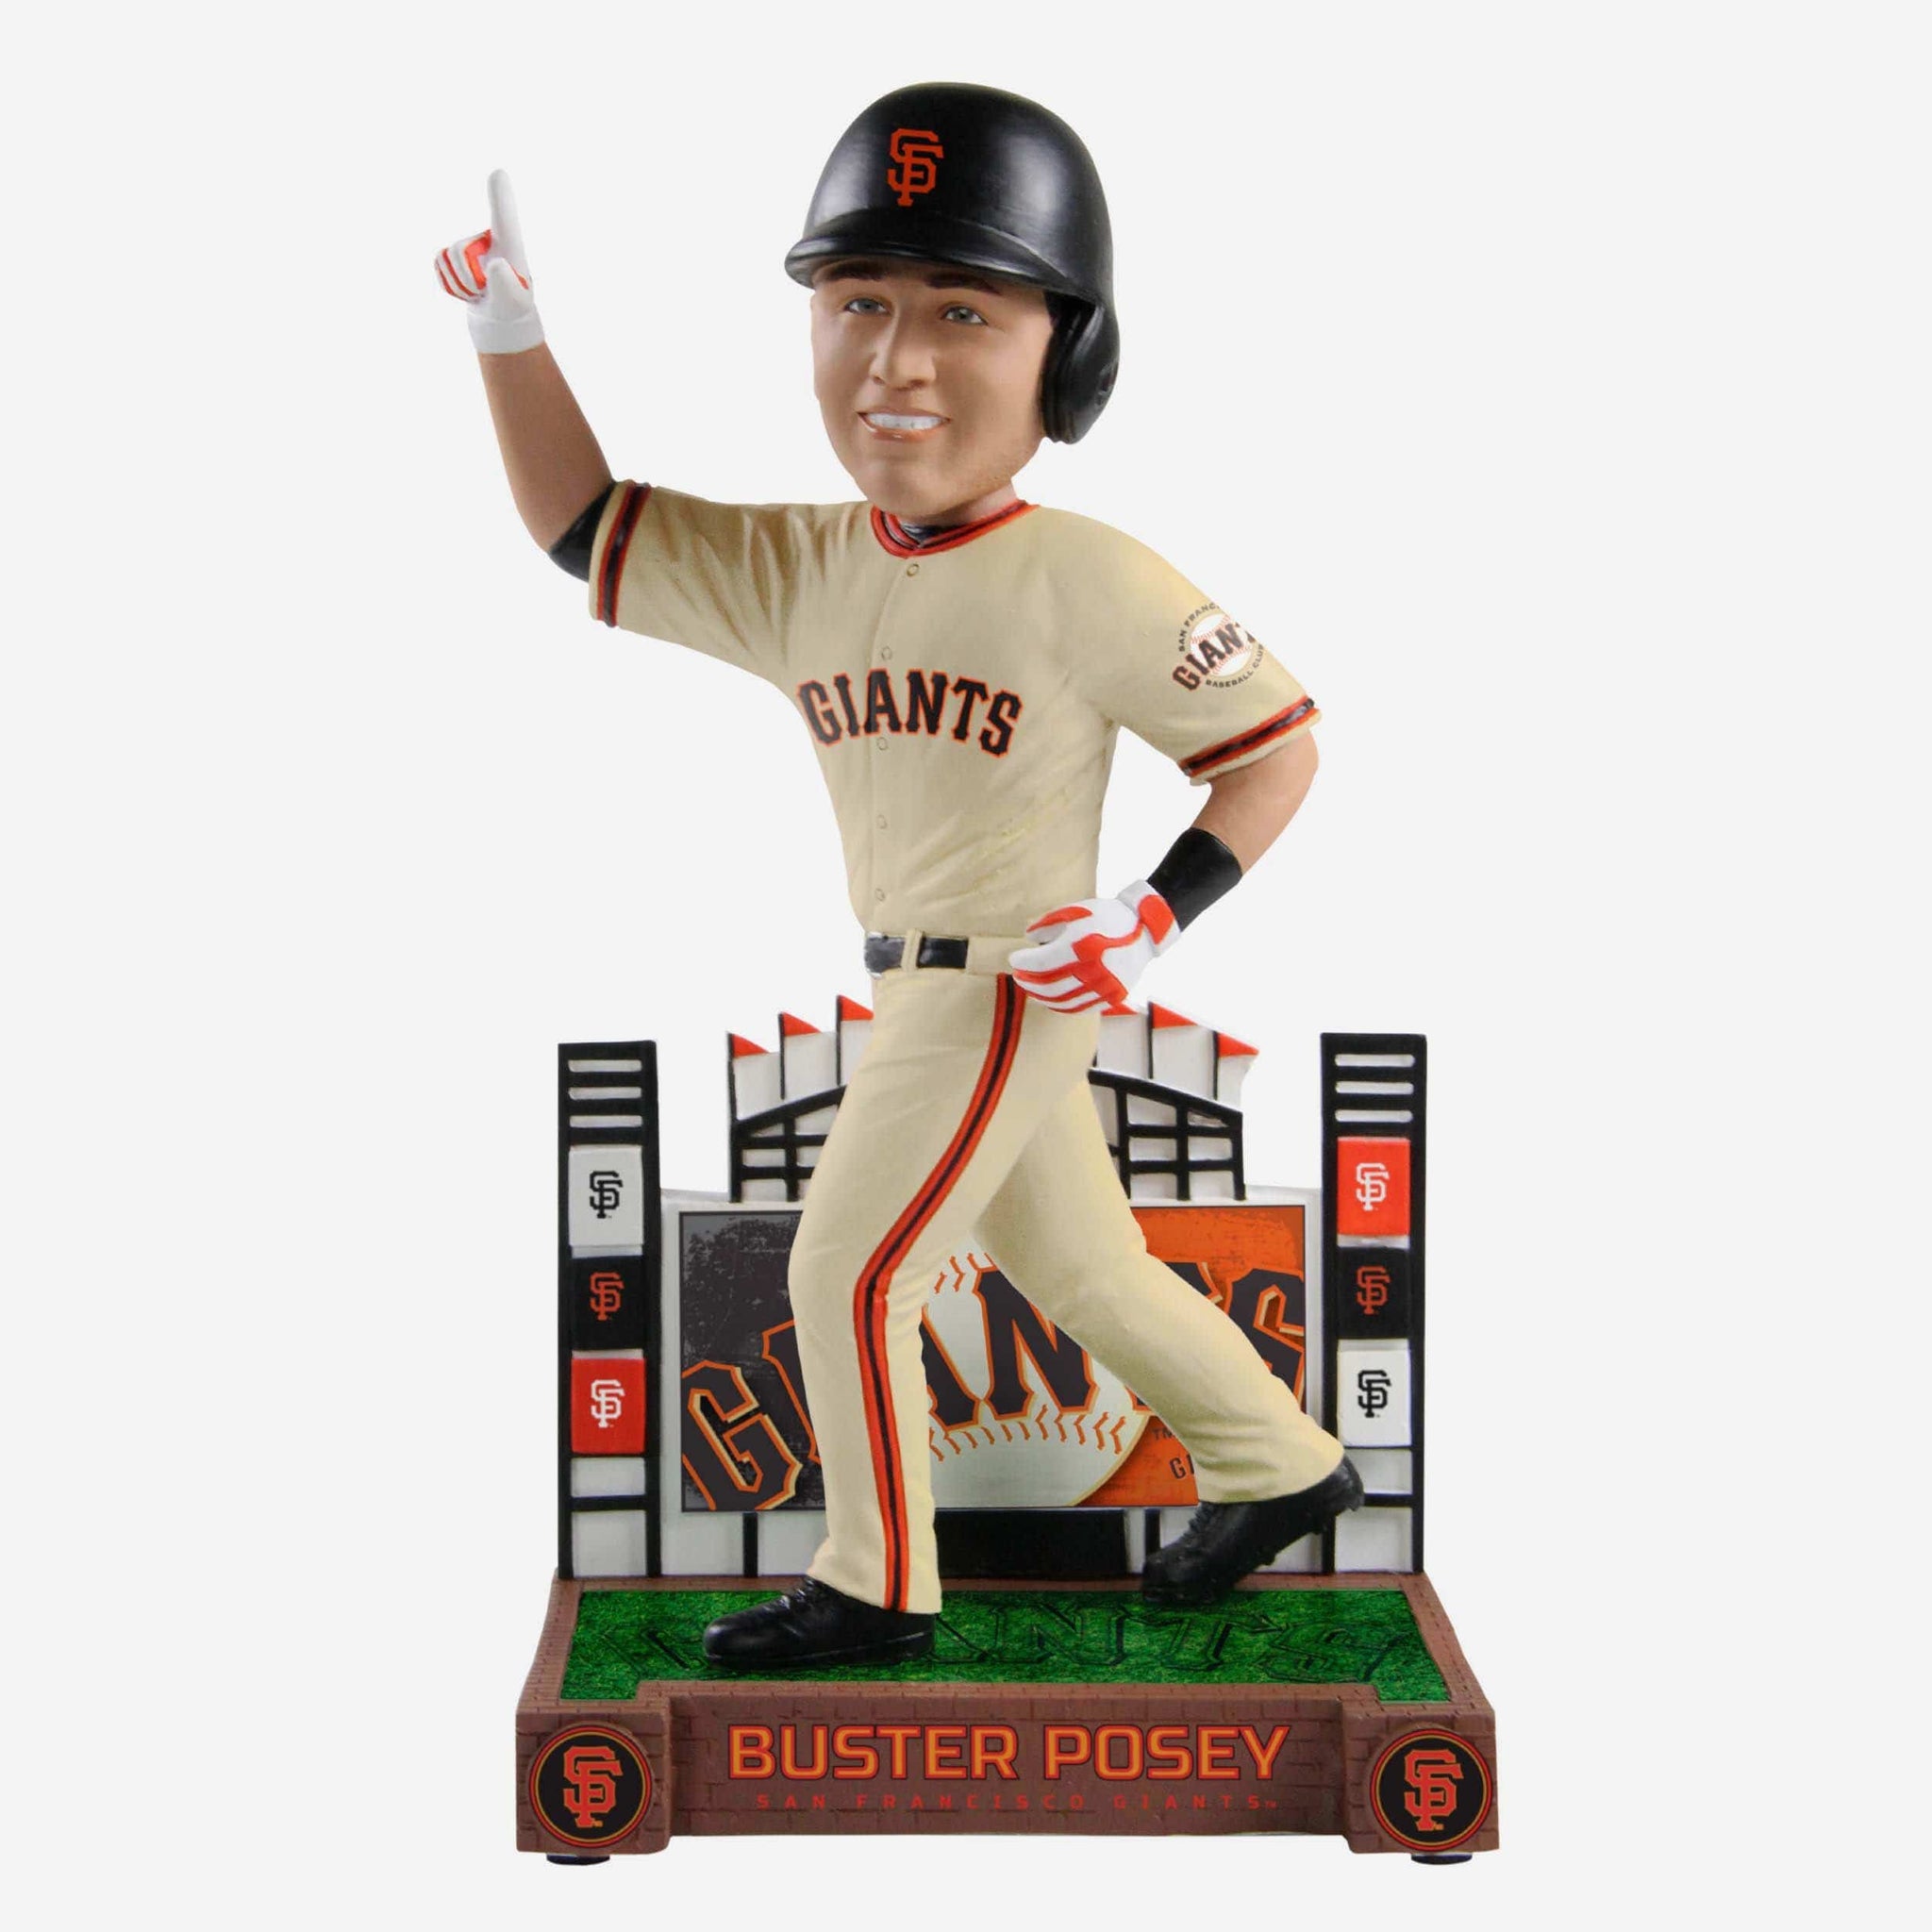 Why can't I find a Buster Posey home jersey to buy? : r/SFGiants